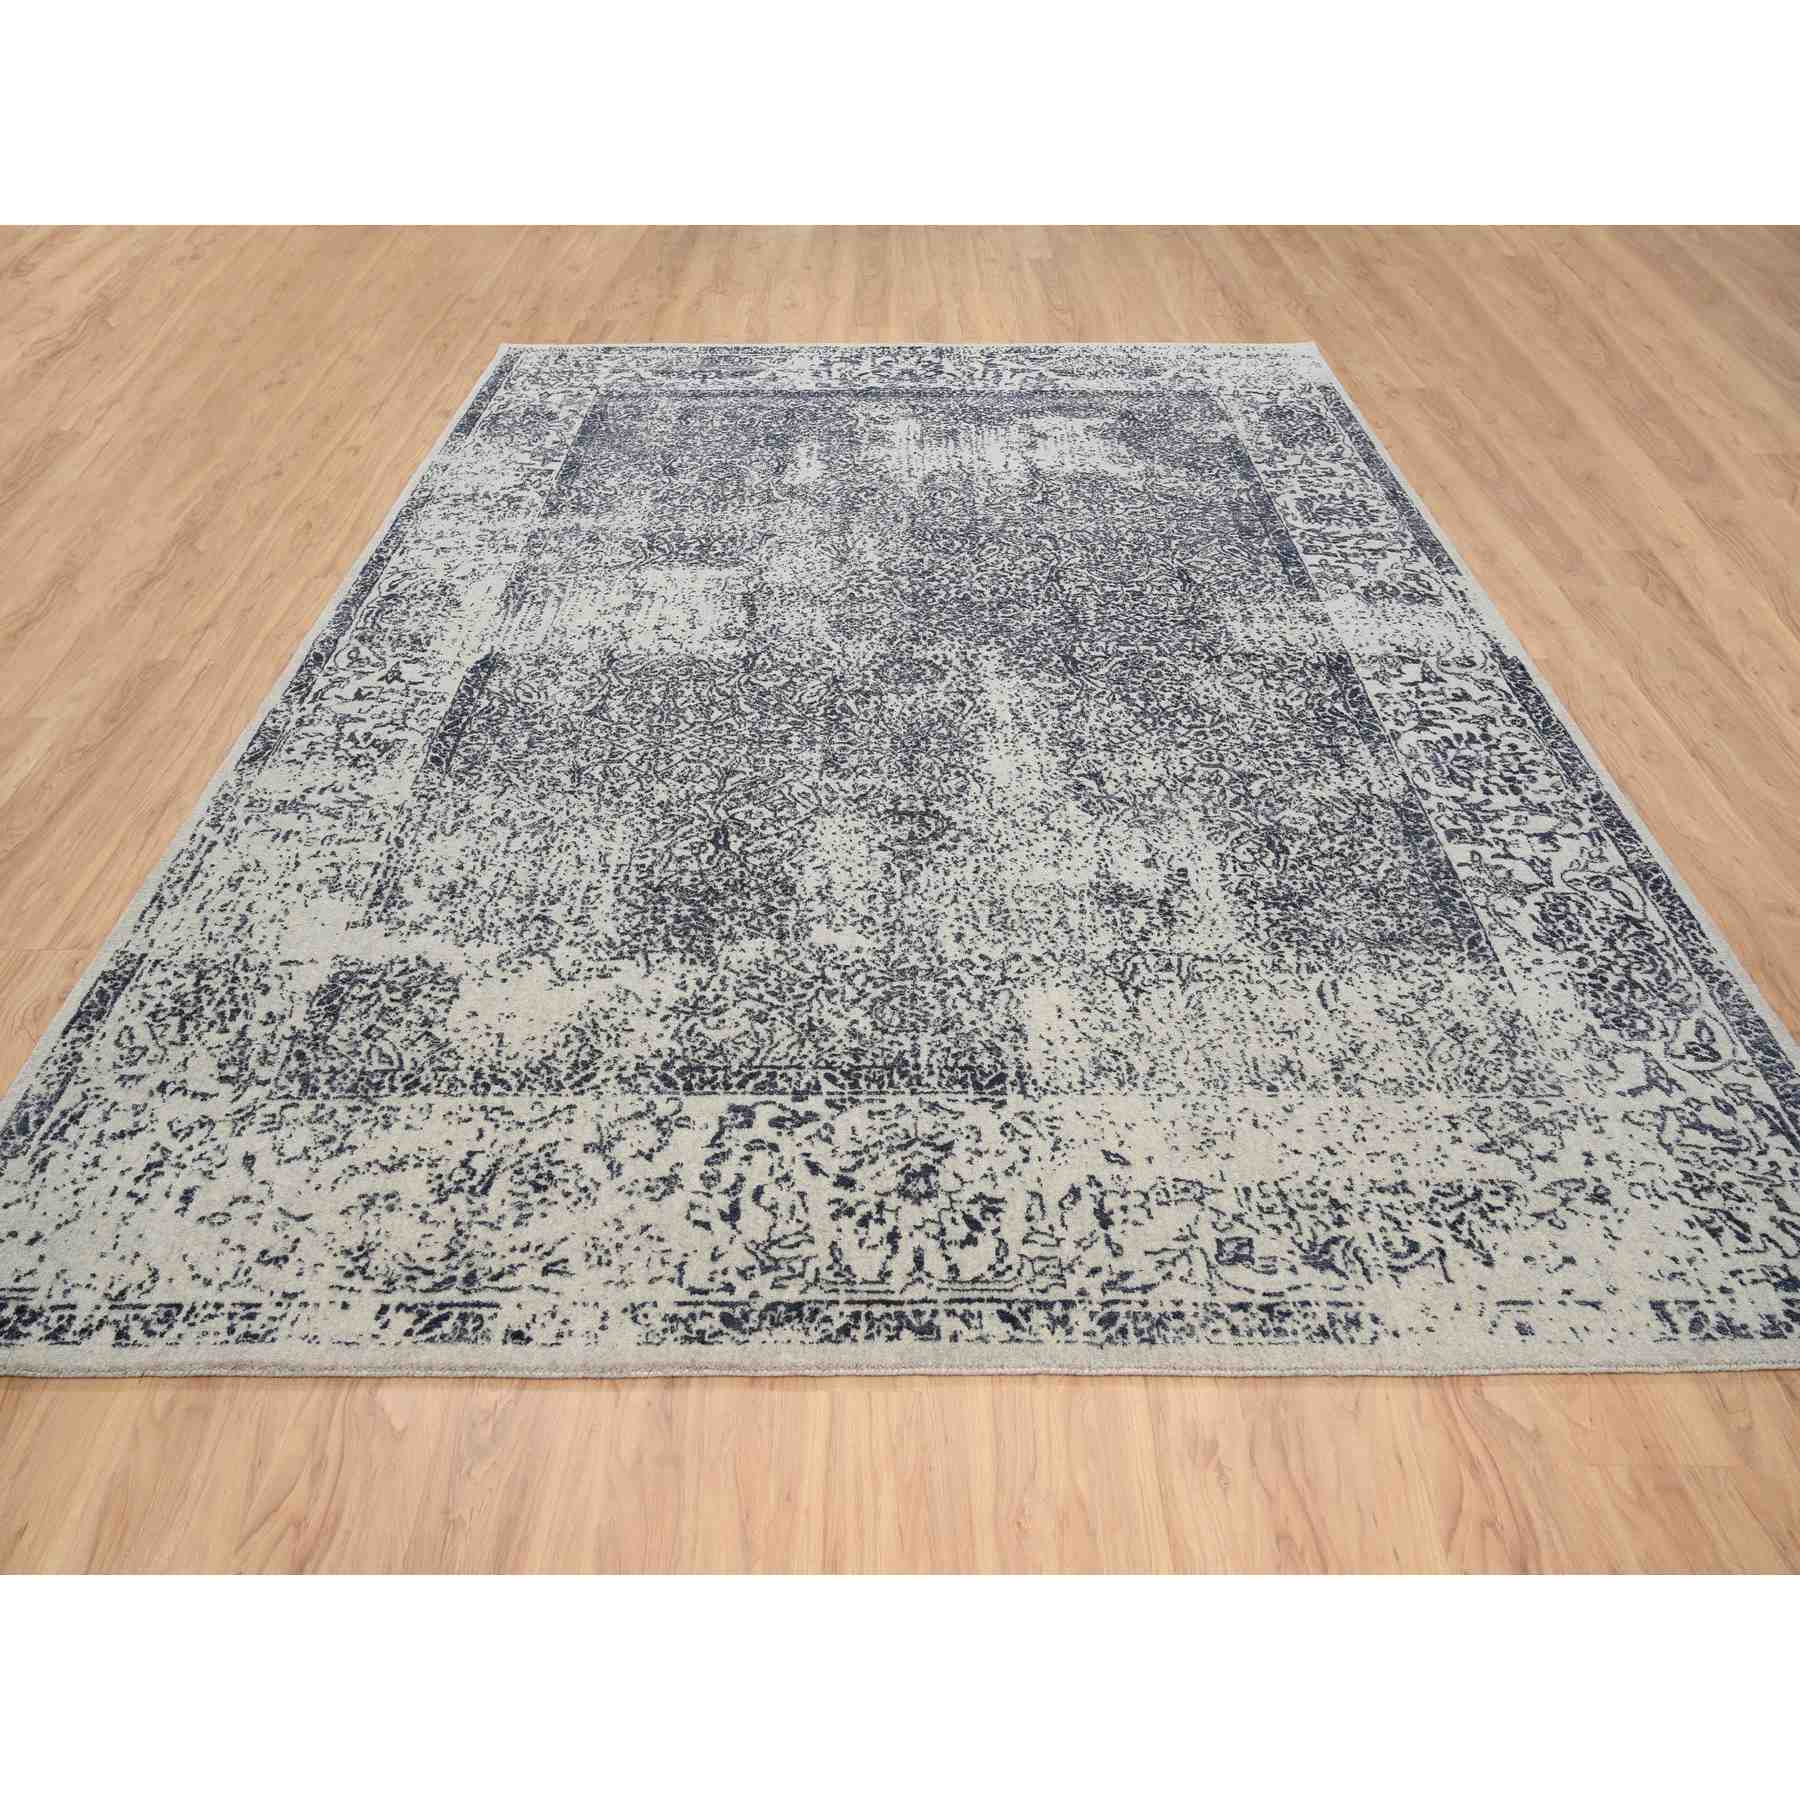 Modern-and-Contemporary-Hand-Loomed-Rug-316280